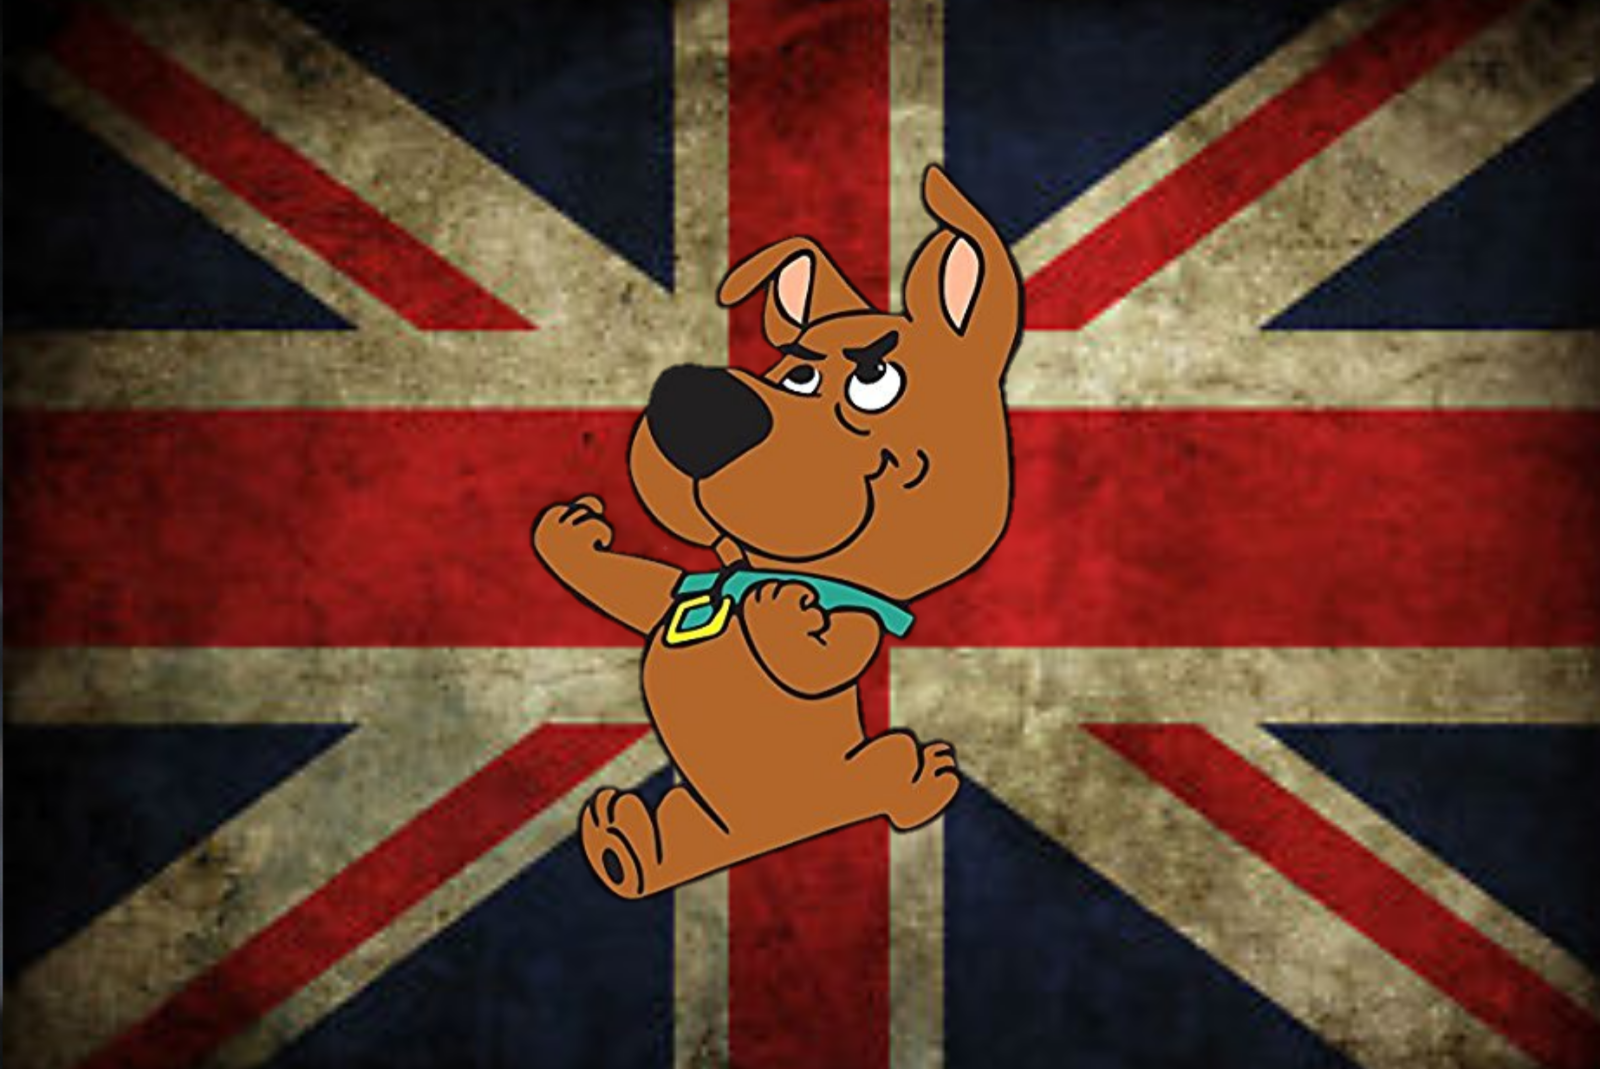 Since Brexit the British Bulldog has turned into Scrappy Doo